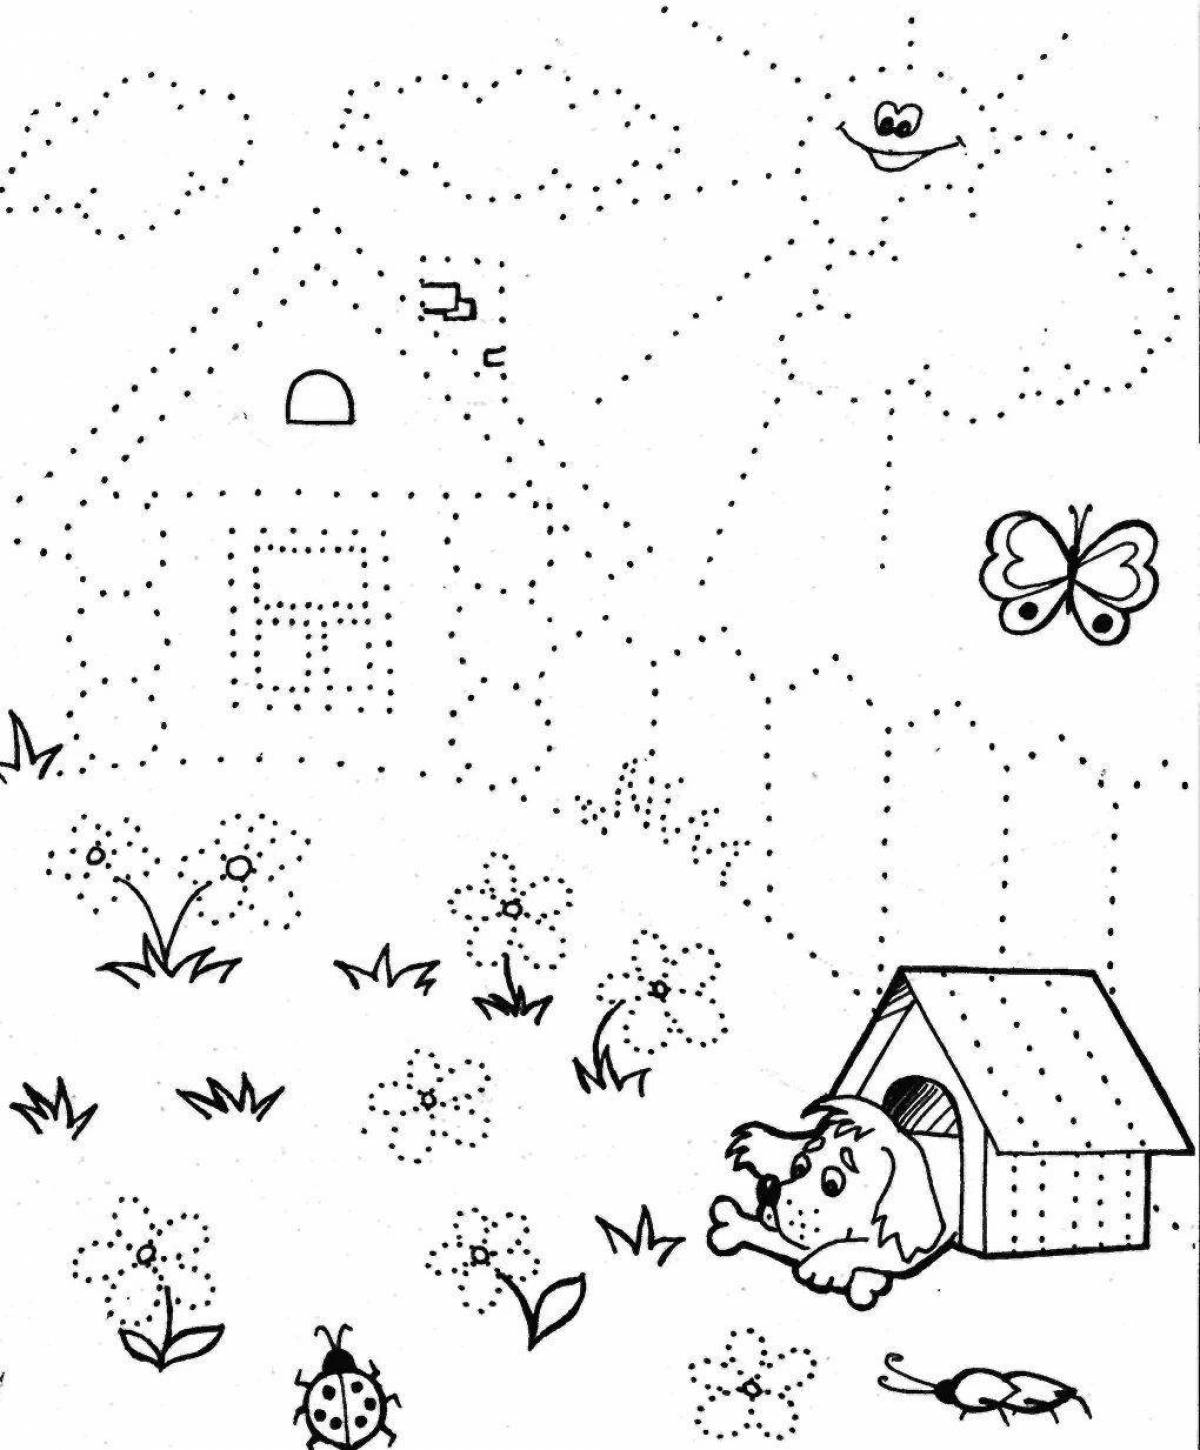 Adorable dotted circle coloring page for kids